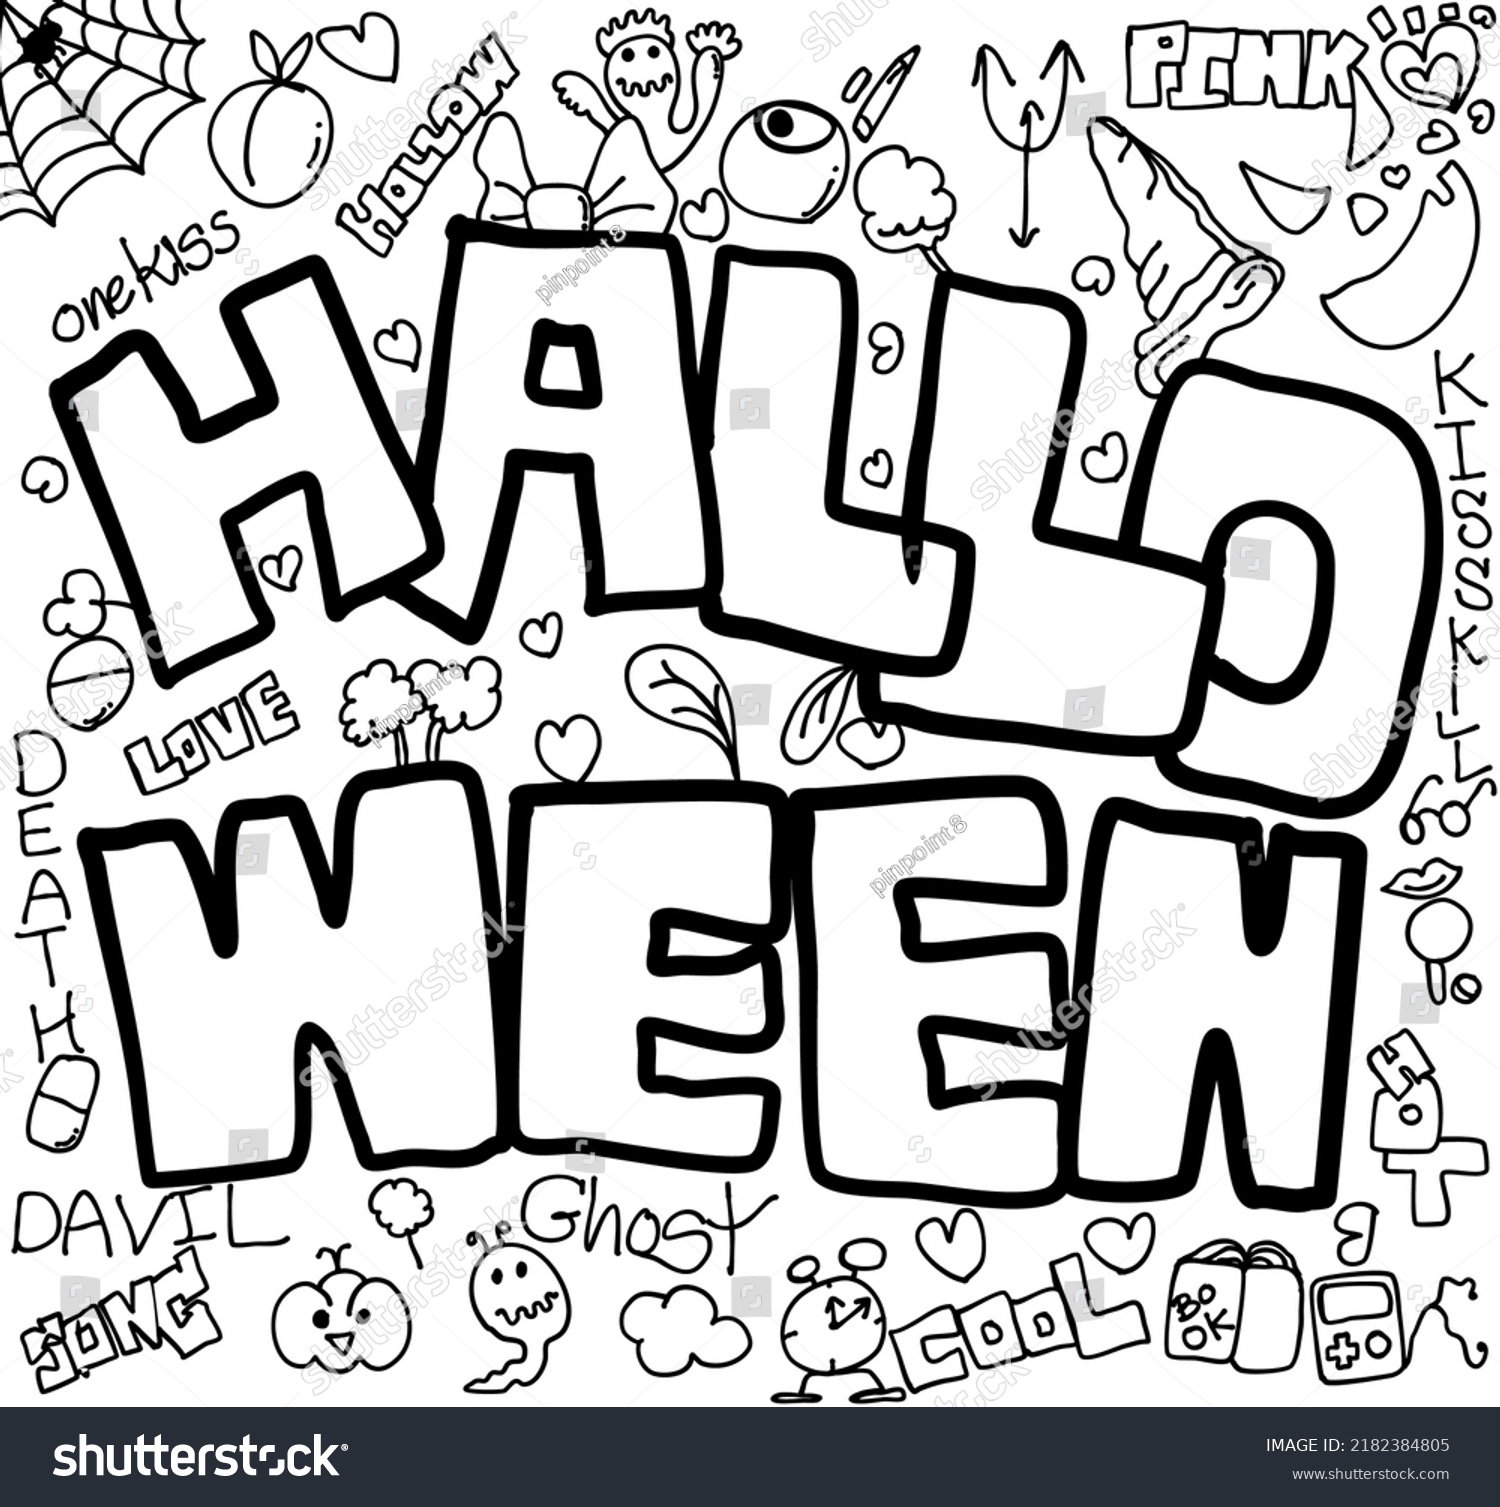 SVG of Hallo ween doodle drawing on isolated background vector. svg